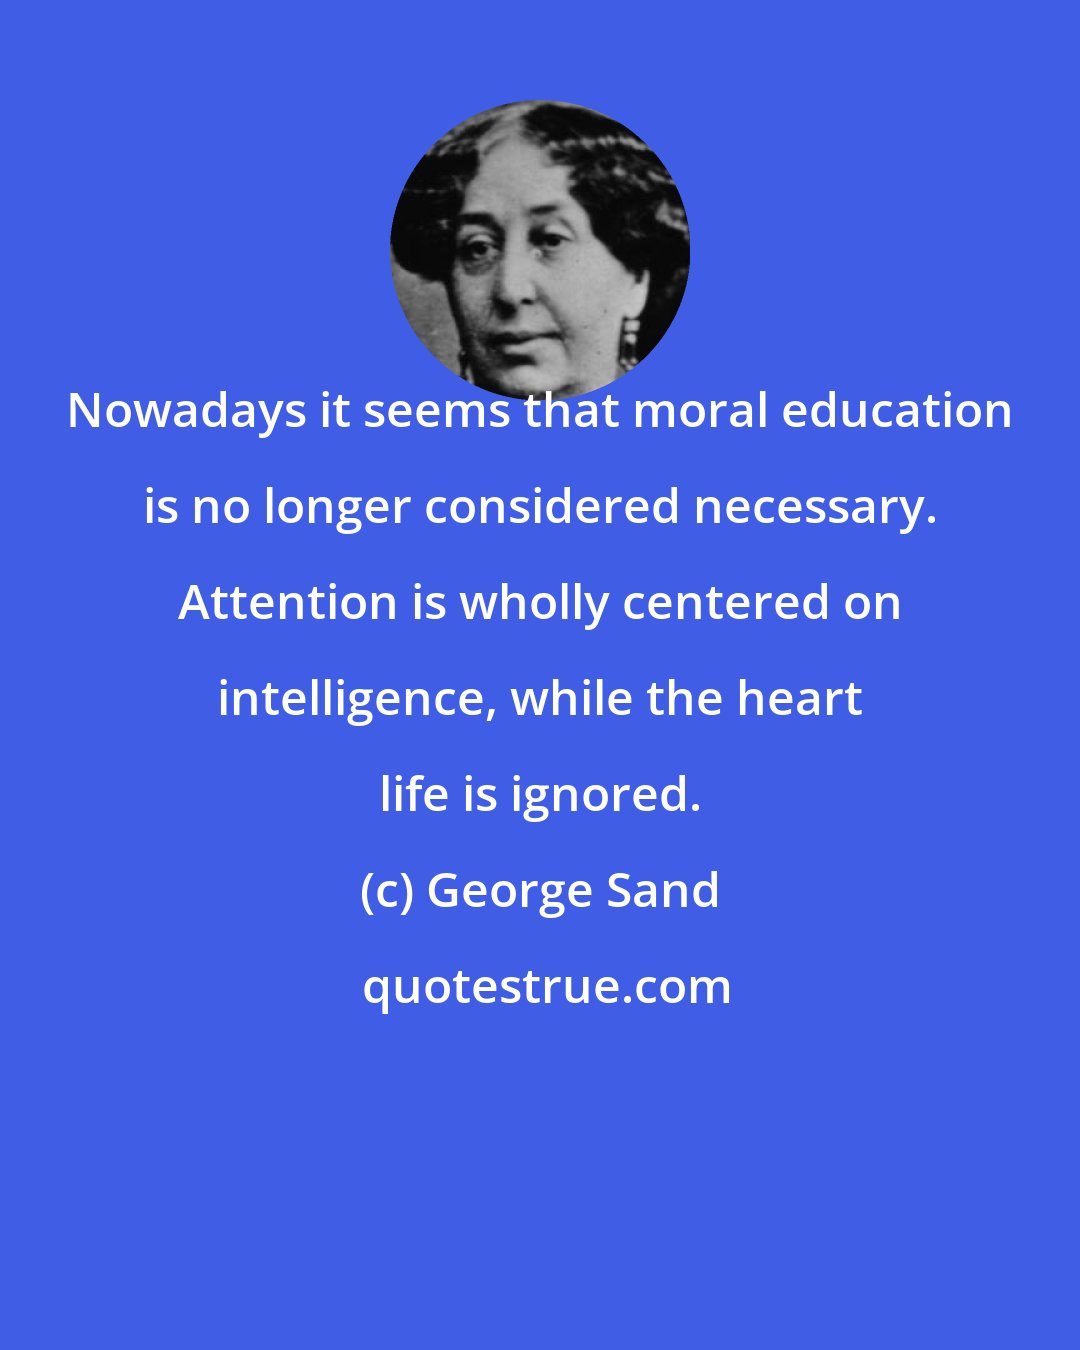 George Sand: Nowadays it seems that moral education is no longer considered necessary. Attention is wholly centered on intelligence, while the heart life is ignored.